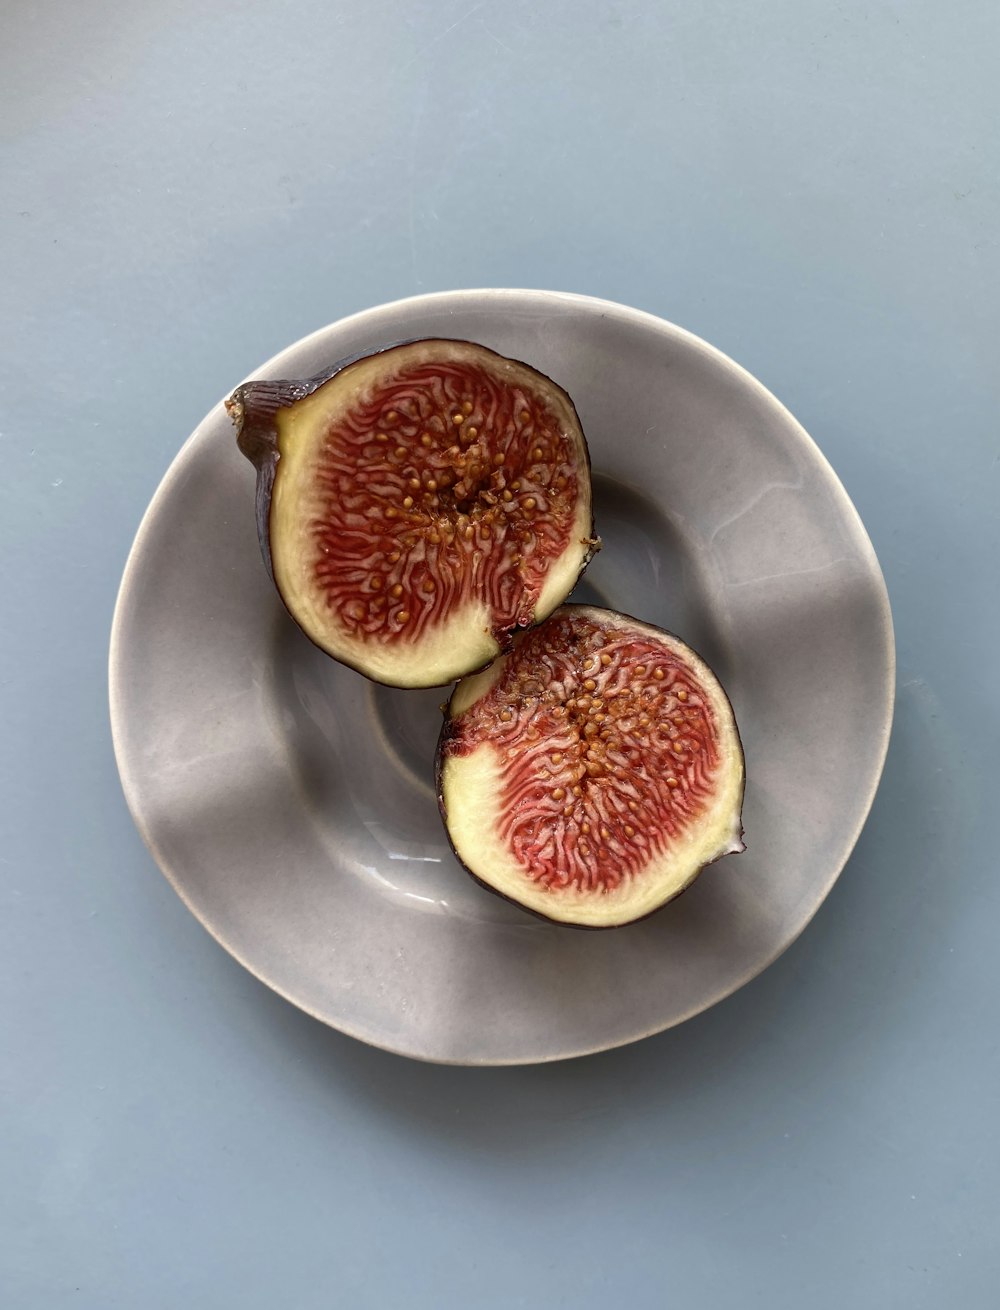 two figs on a plate on a blue table